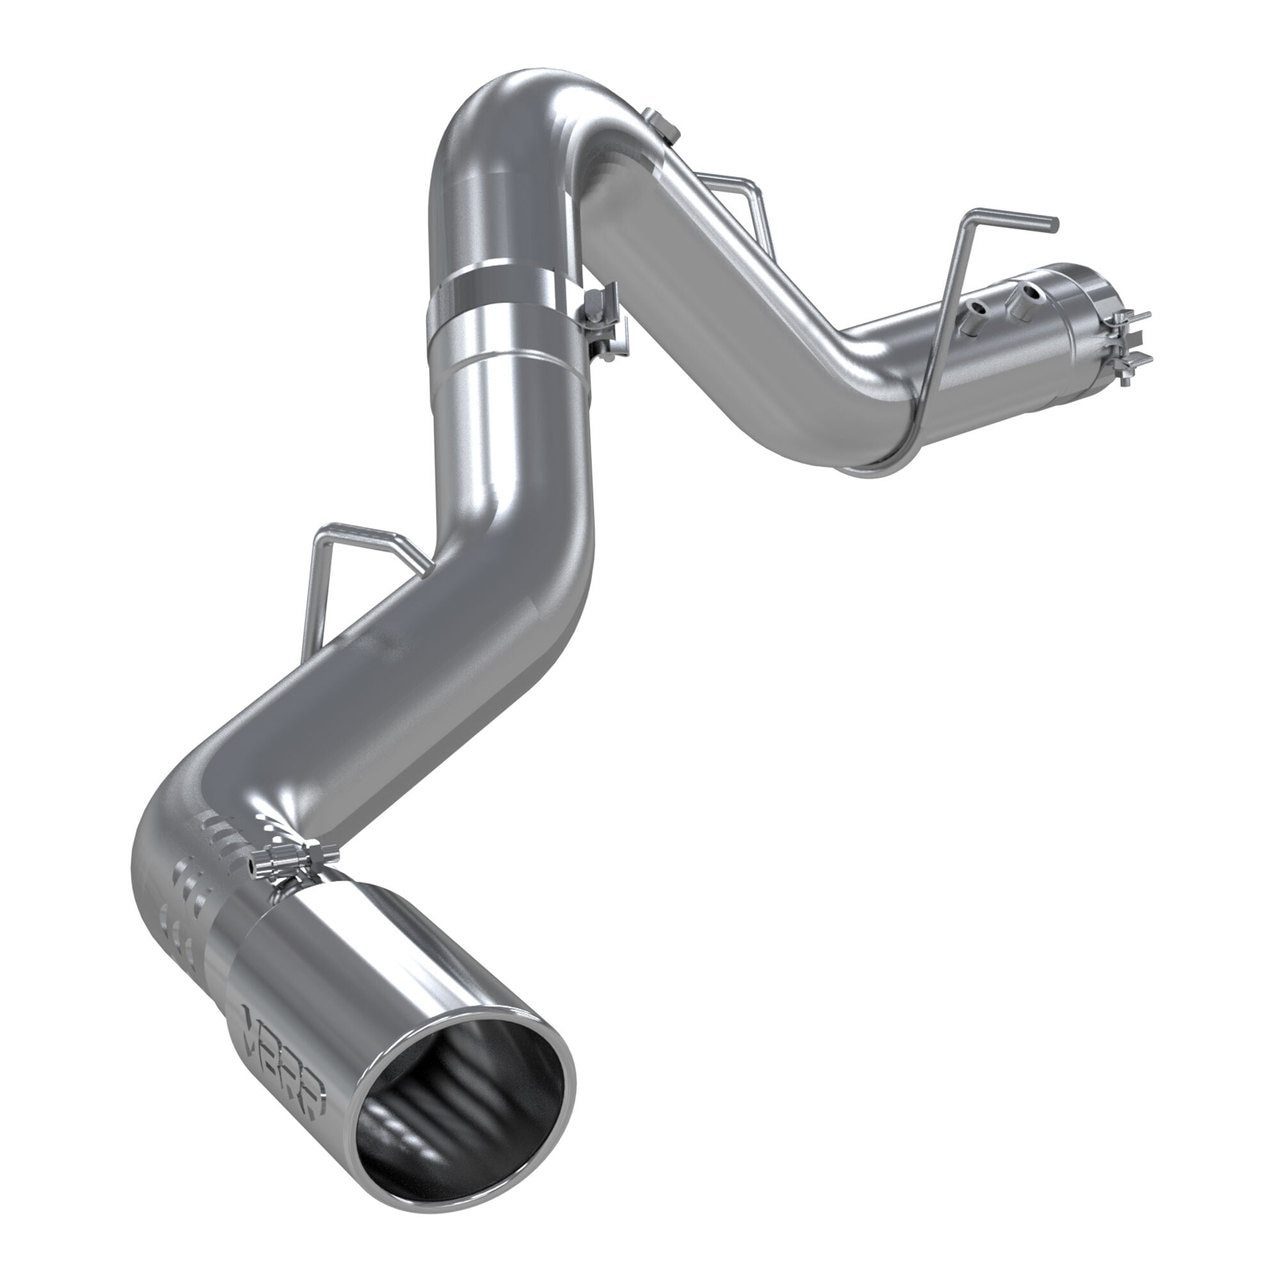 '20-23 Chevy/GMC 6.6L Duramax AL 4" Single Side Filter Back Exhaust MBRP display